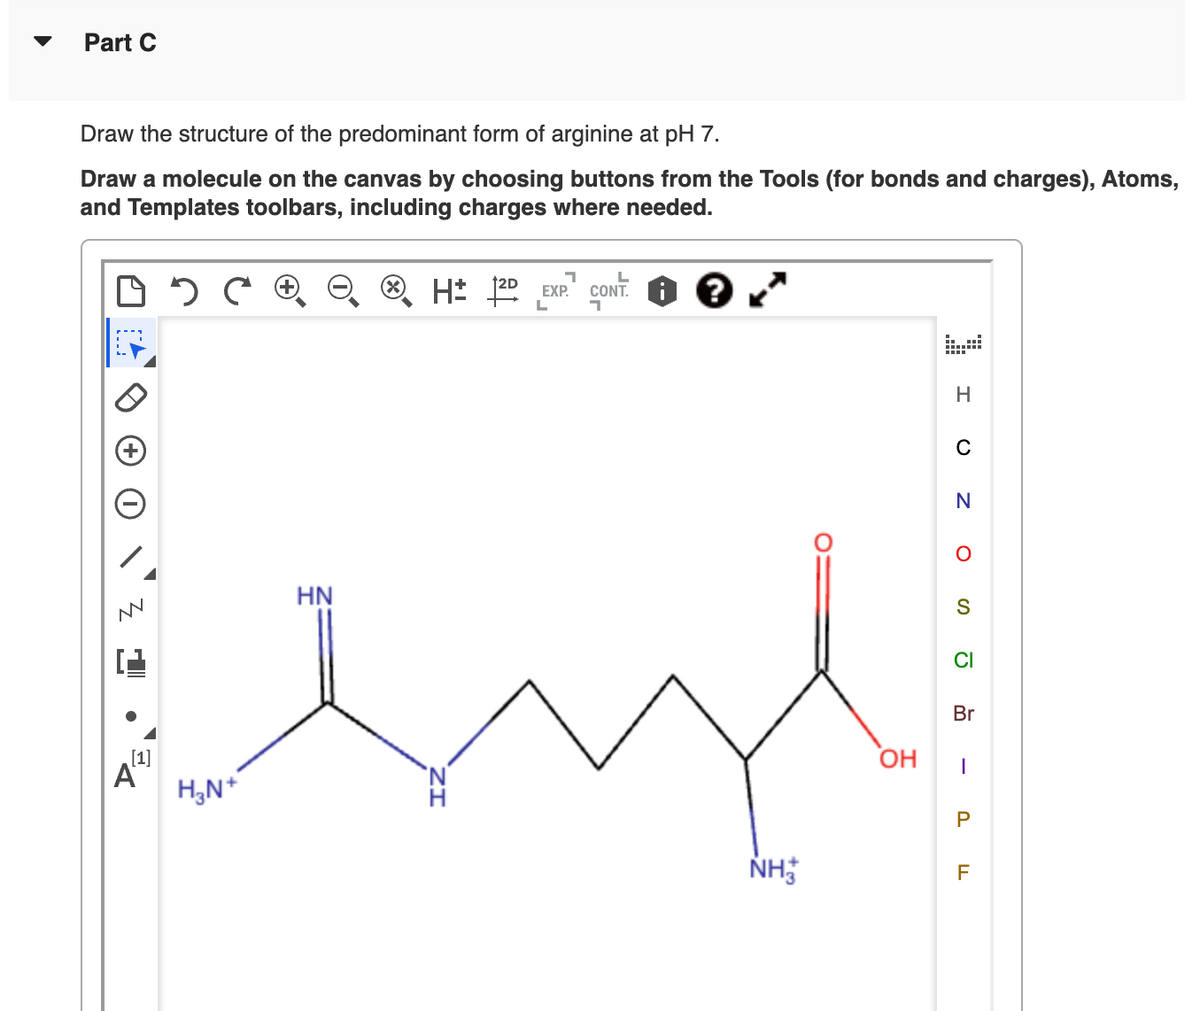 Part C
Draw the structure of the predominant form of arginine at pH 7.
Draw a molecule on the canvas by choosing buttons from the Tools (for bonds and charges), Atoms,
and Templates toolbars, including charges where needed.
N
HN
Α
[1]
H3N+
H±
2D EXP.
L
י
CONT.
H
0
N
о
S
0
Br
OH
|
P
NH
F